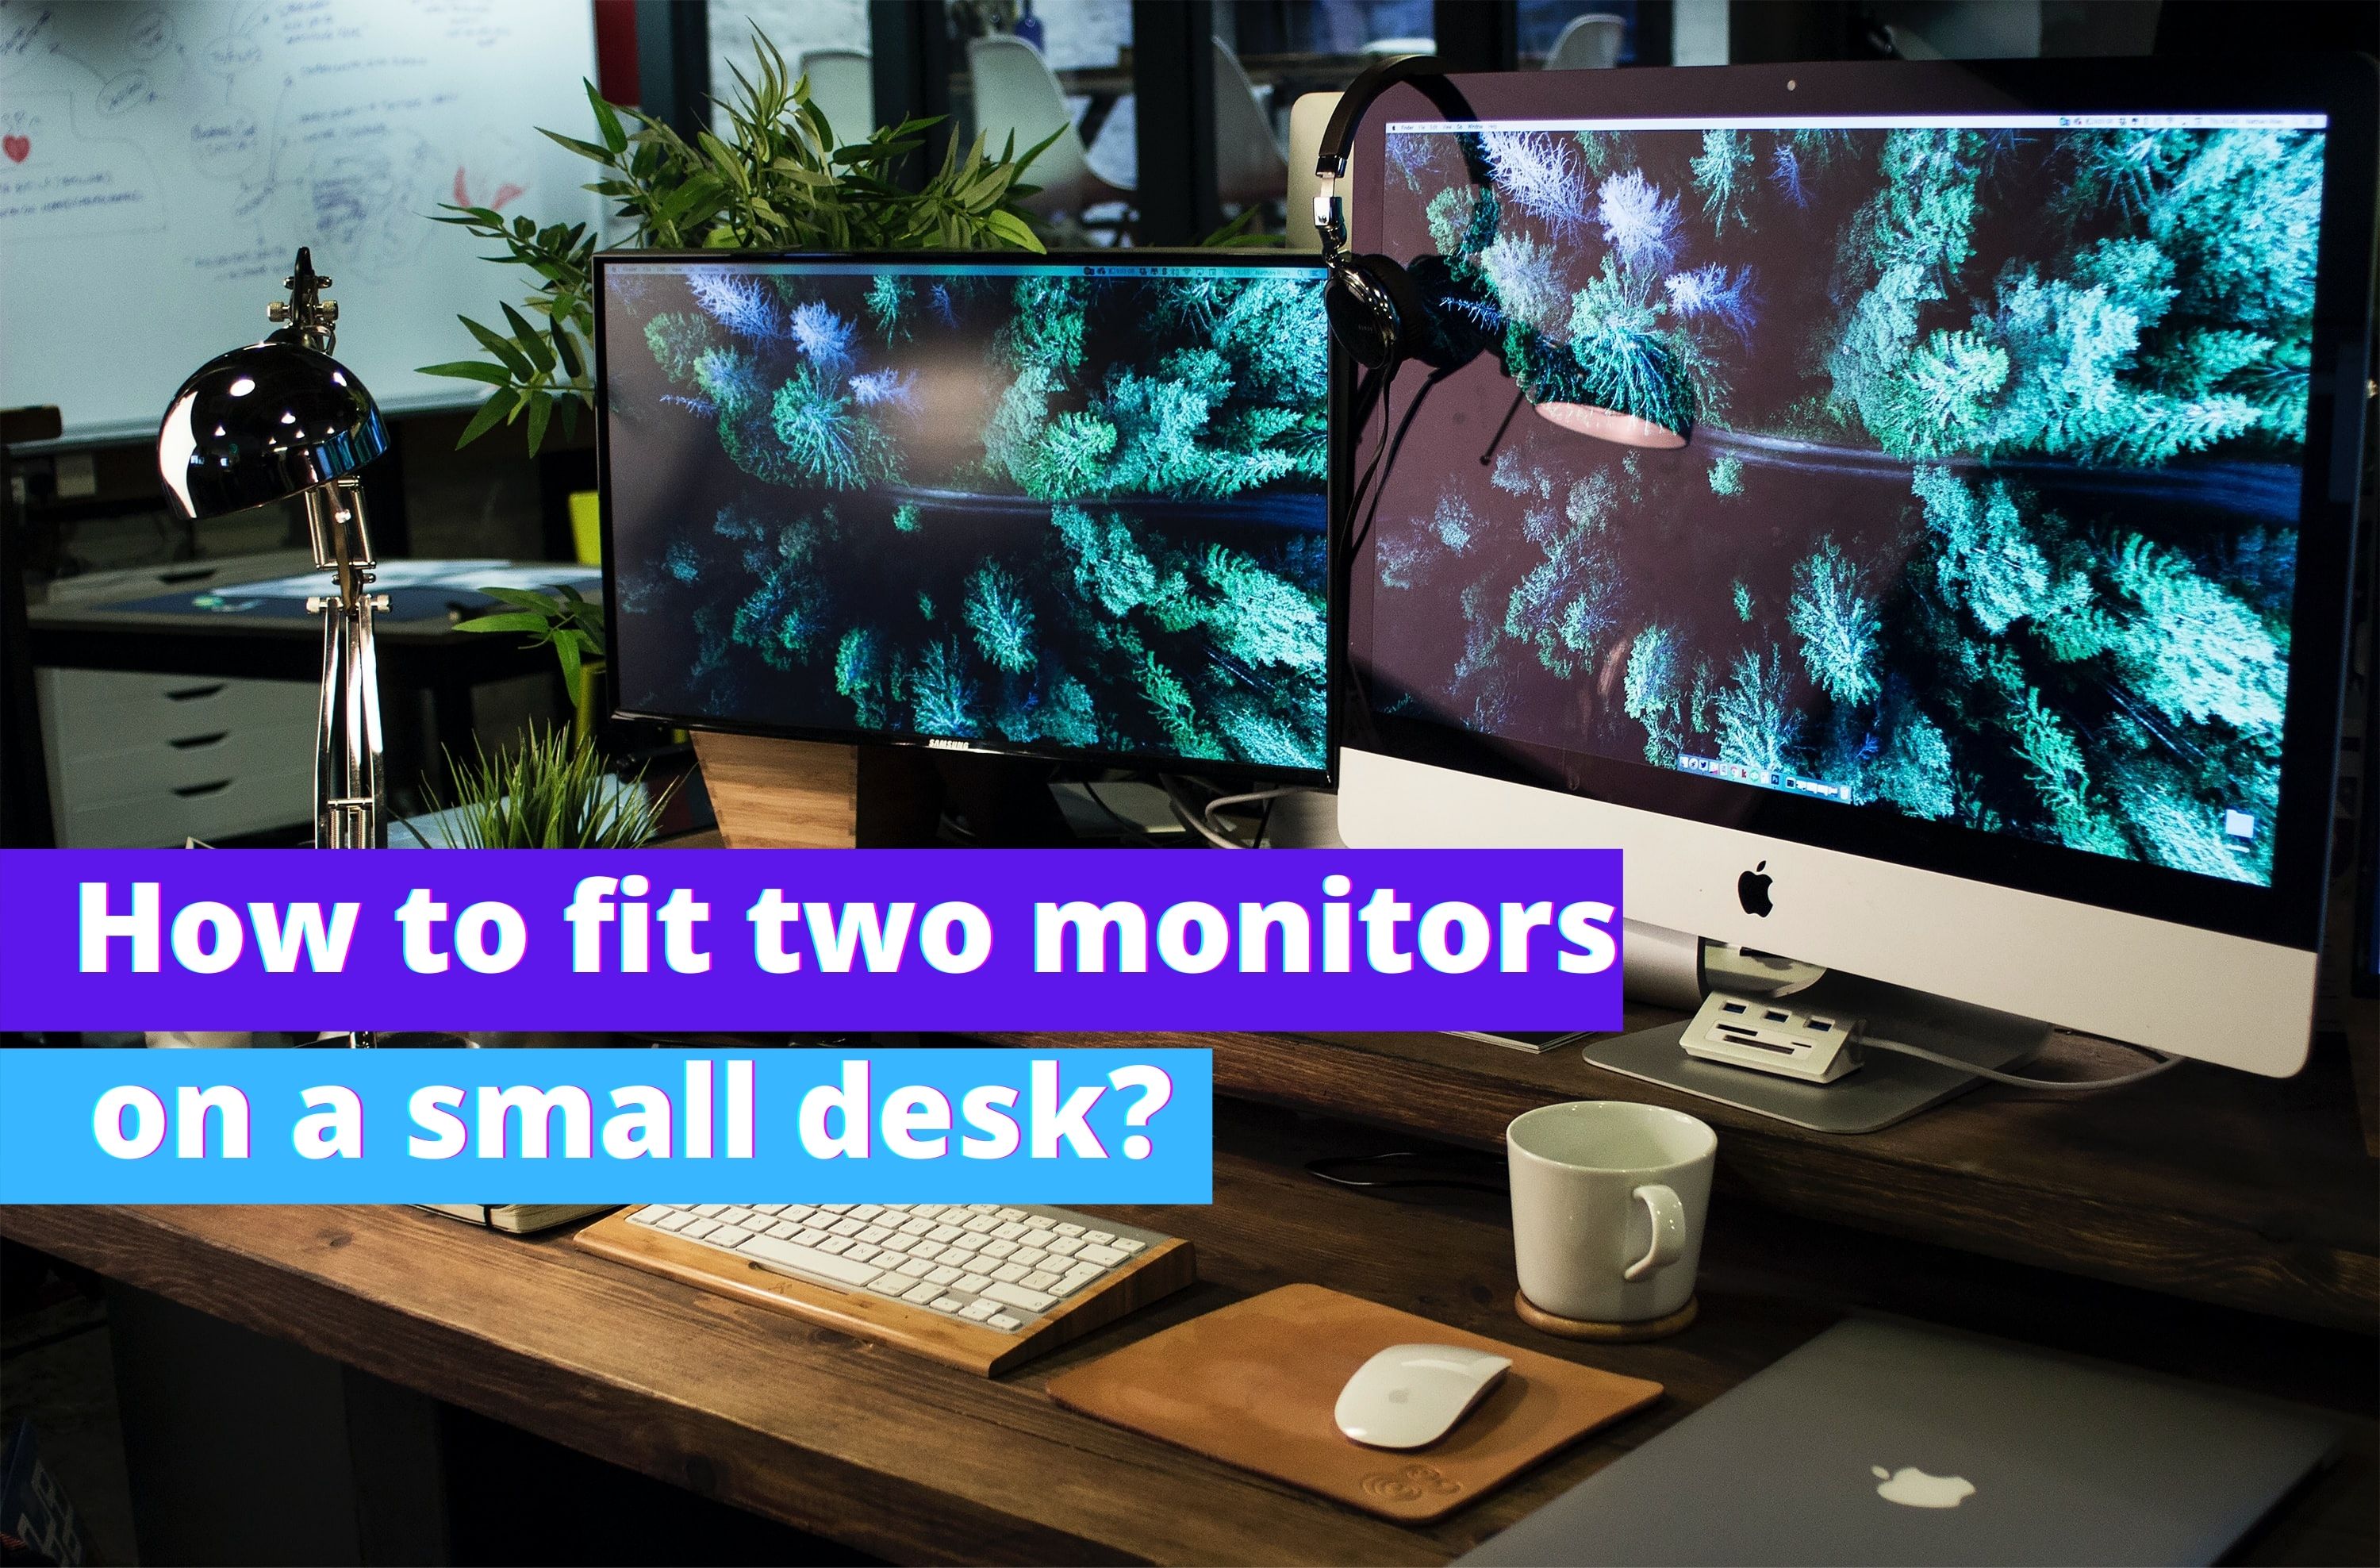 How to fit two monitors on a small desk